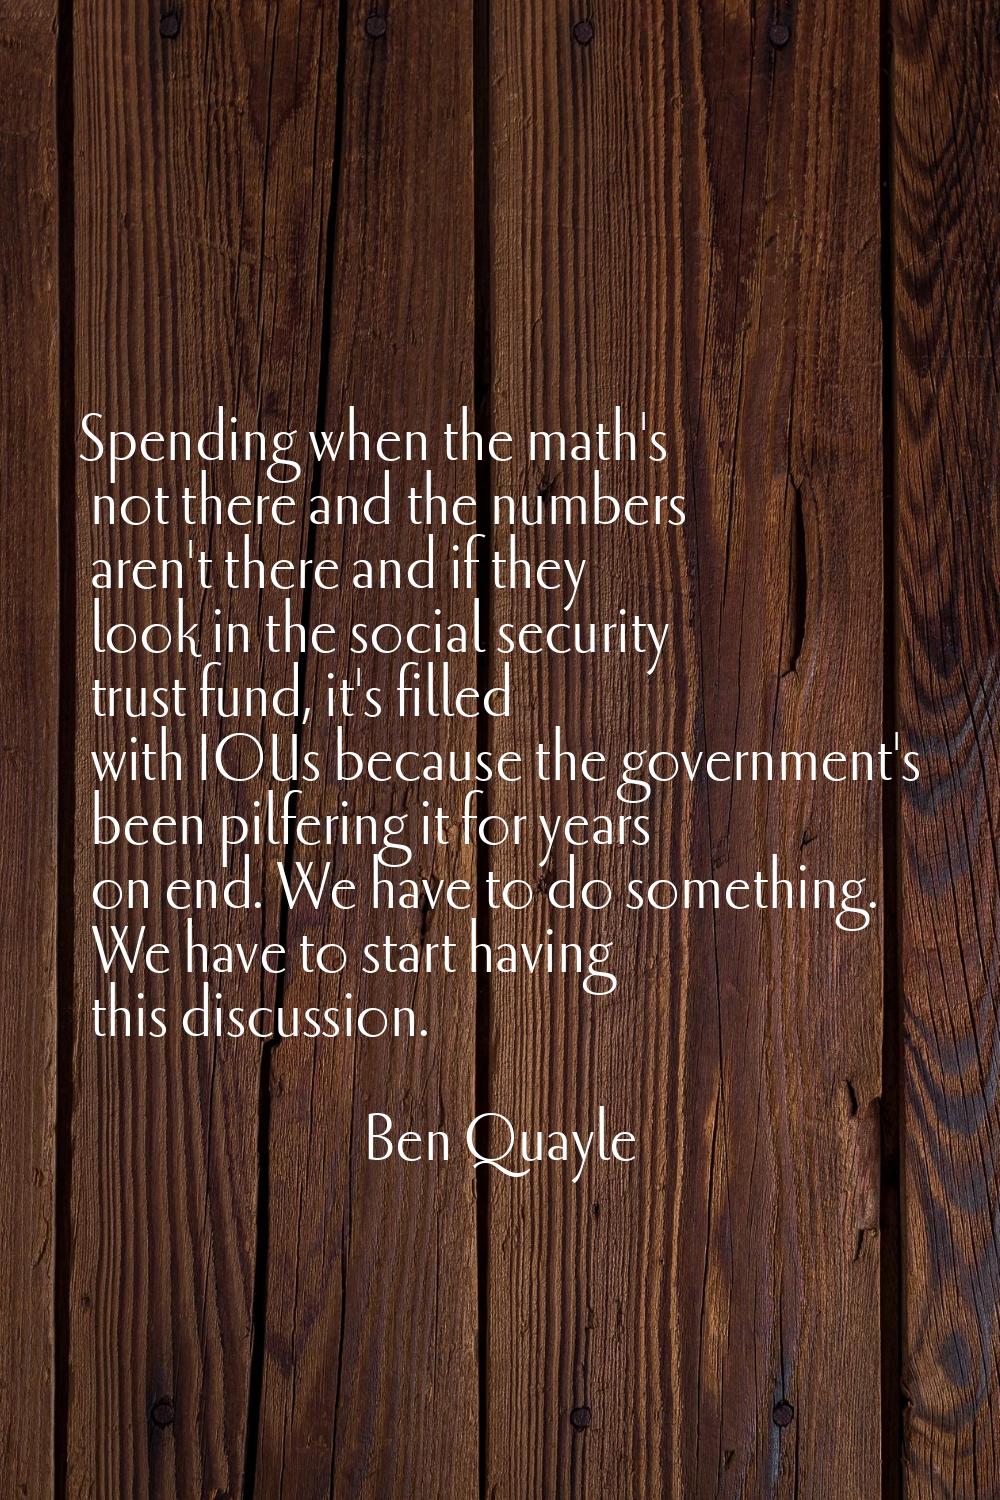 Spending when the math's not there and the numbers aren't there and if they look in the social secu